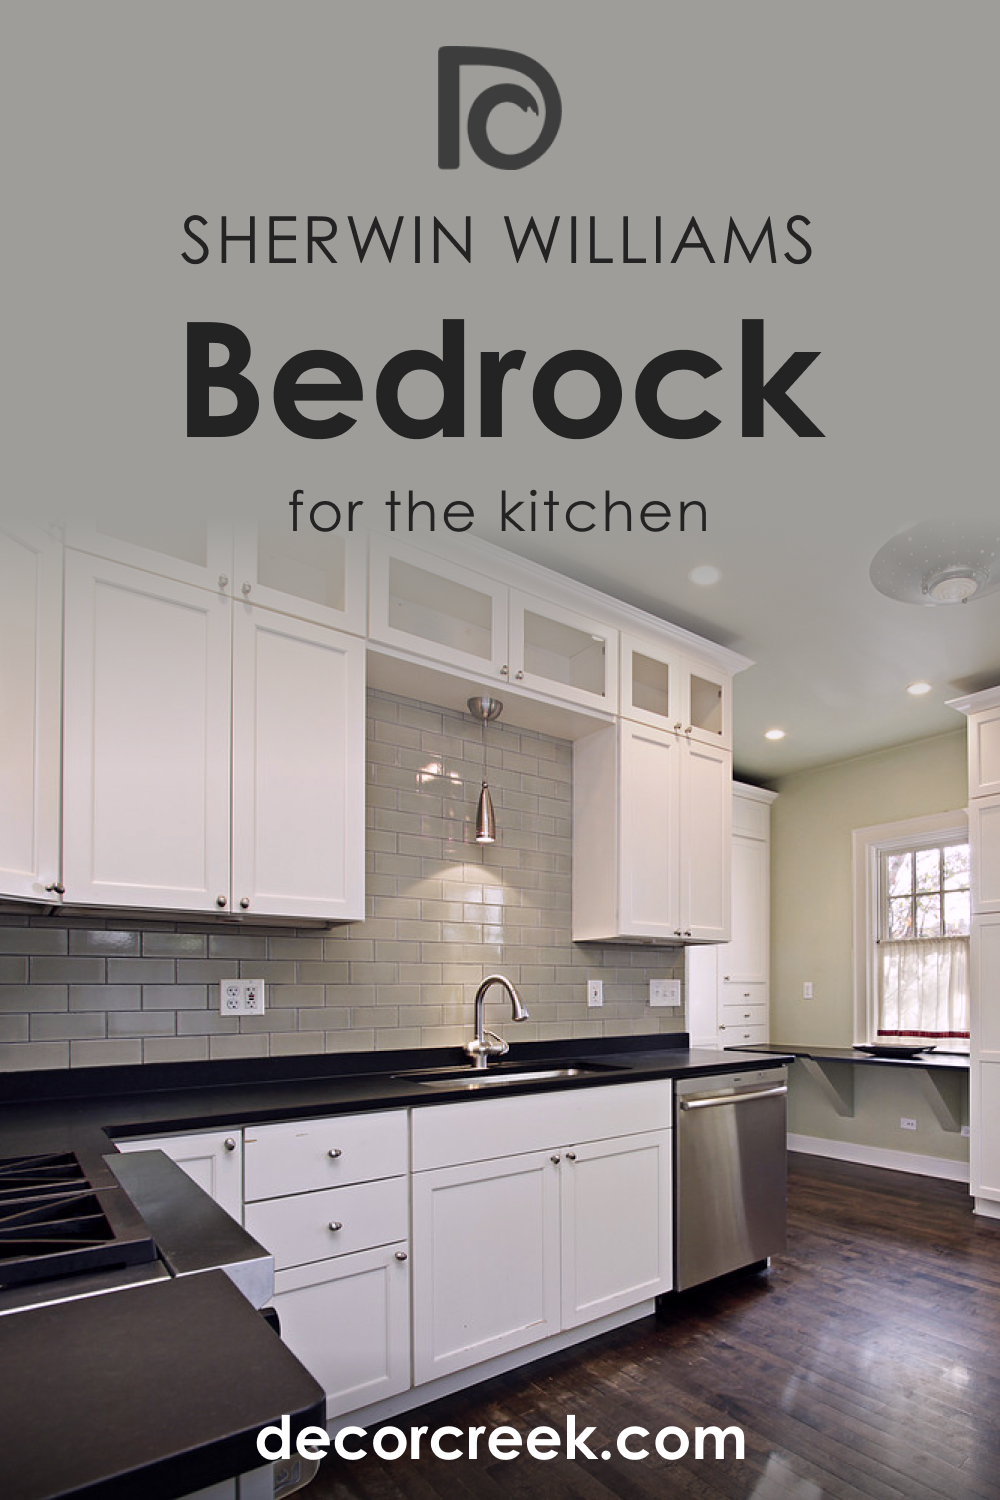 How to Use SW 9563 Bedrock for the Kitchen?